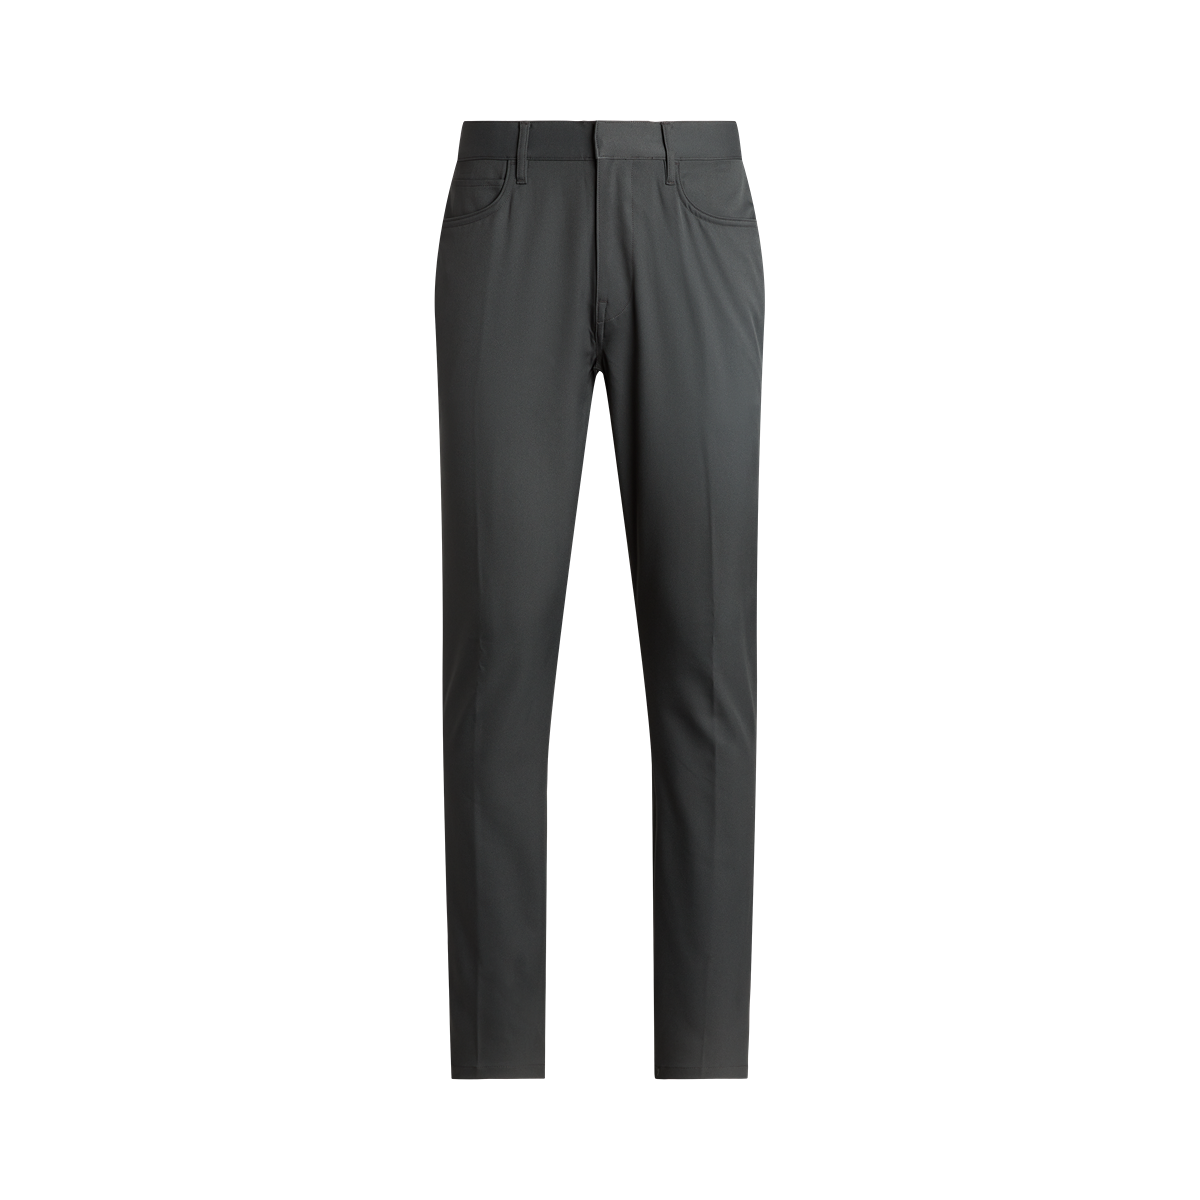 MIDWEIGHT MOBILITY TECH 5-POCKET PANT - ACTIVE FIT Large Image